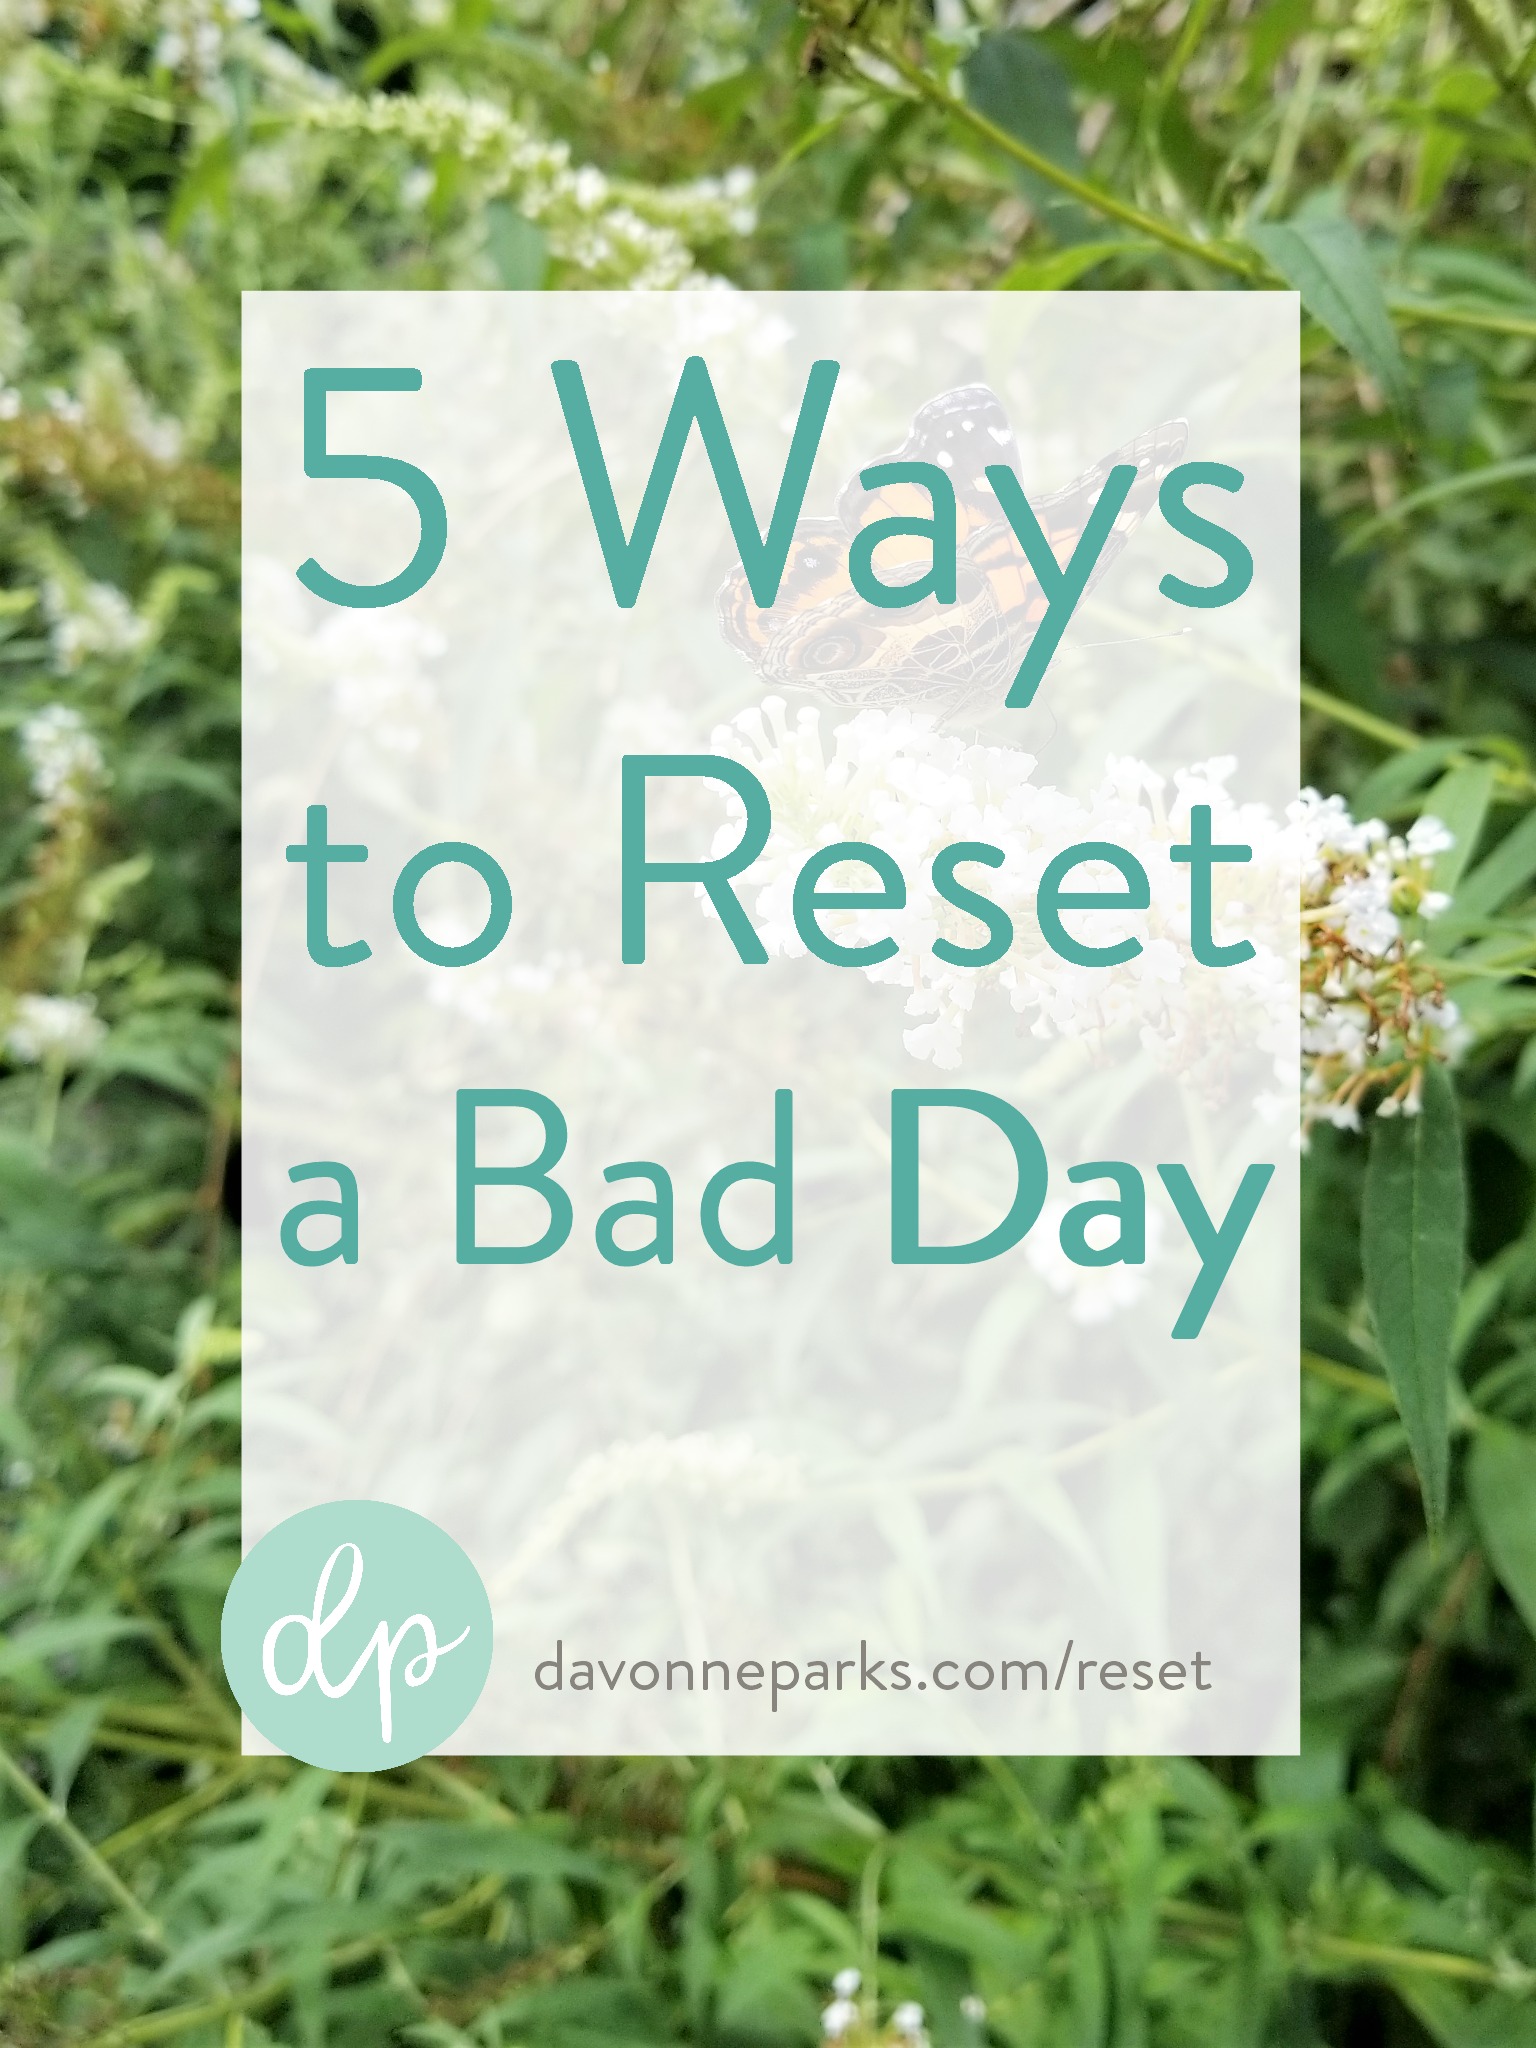 5 Ways to Reset a Bad Day